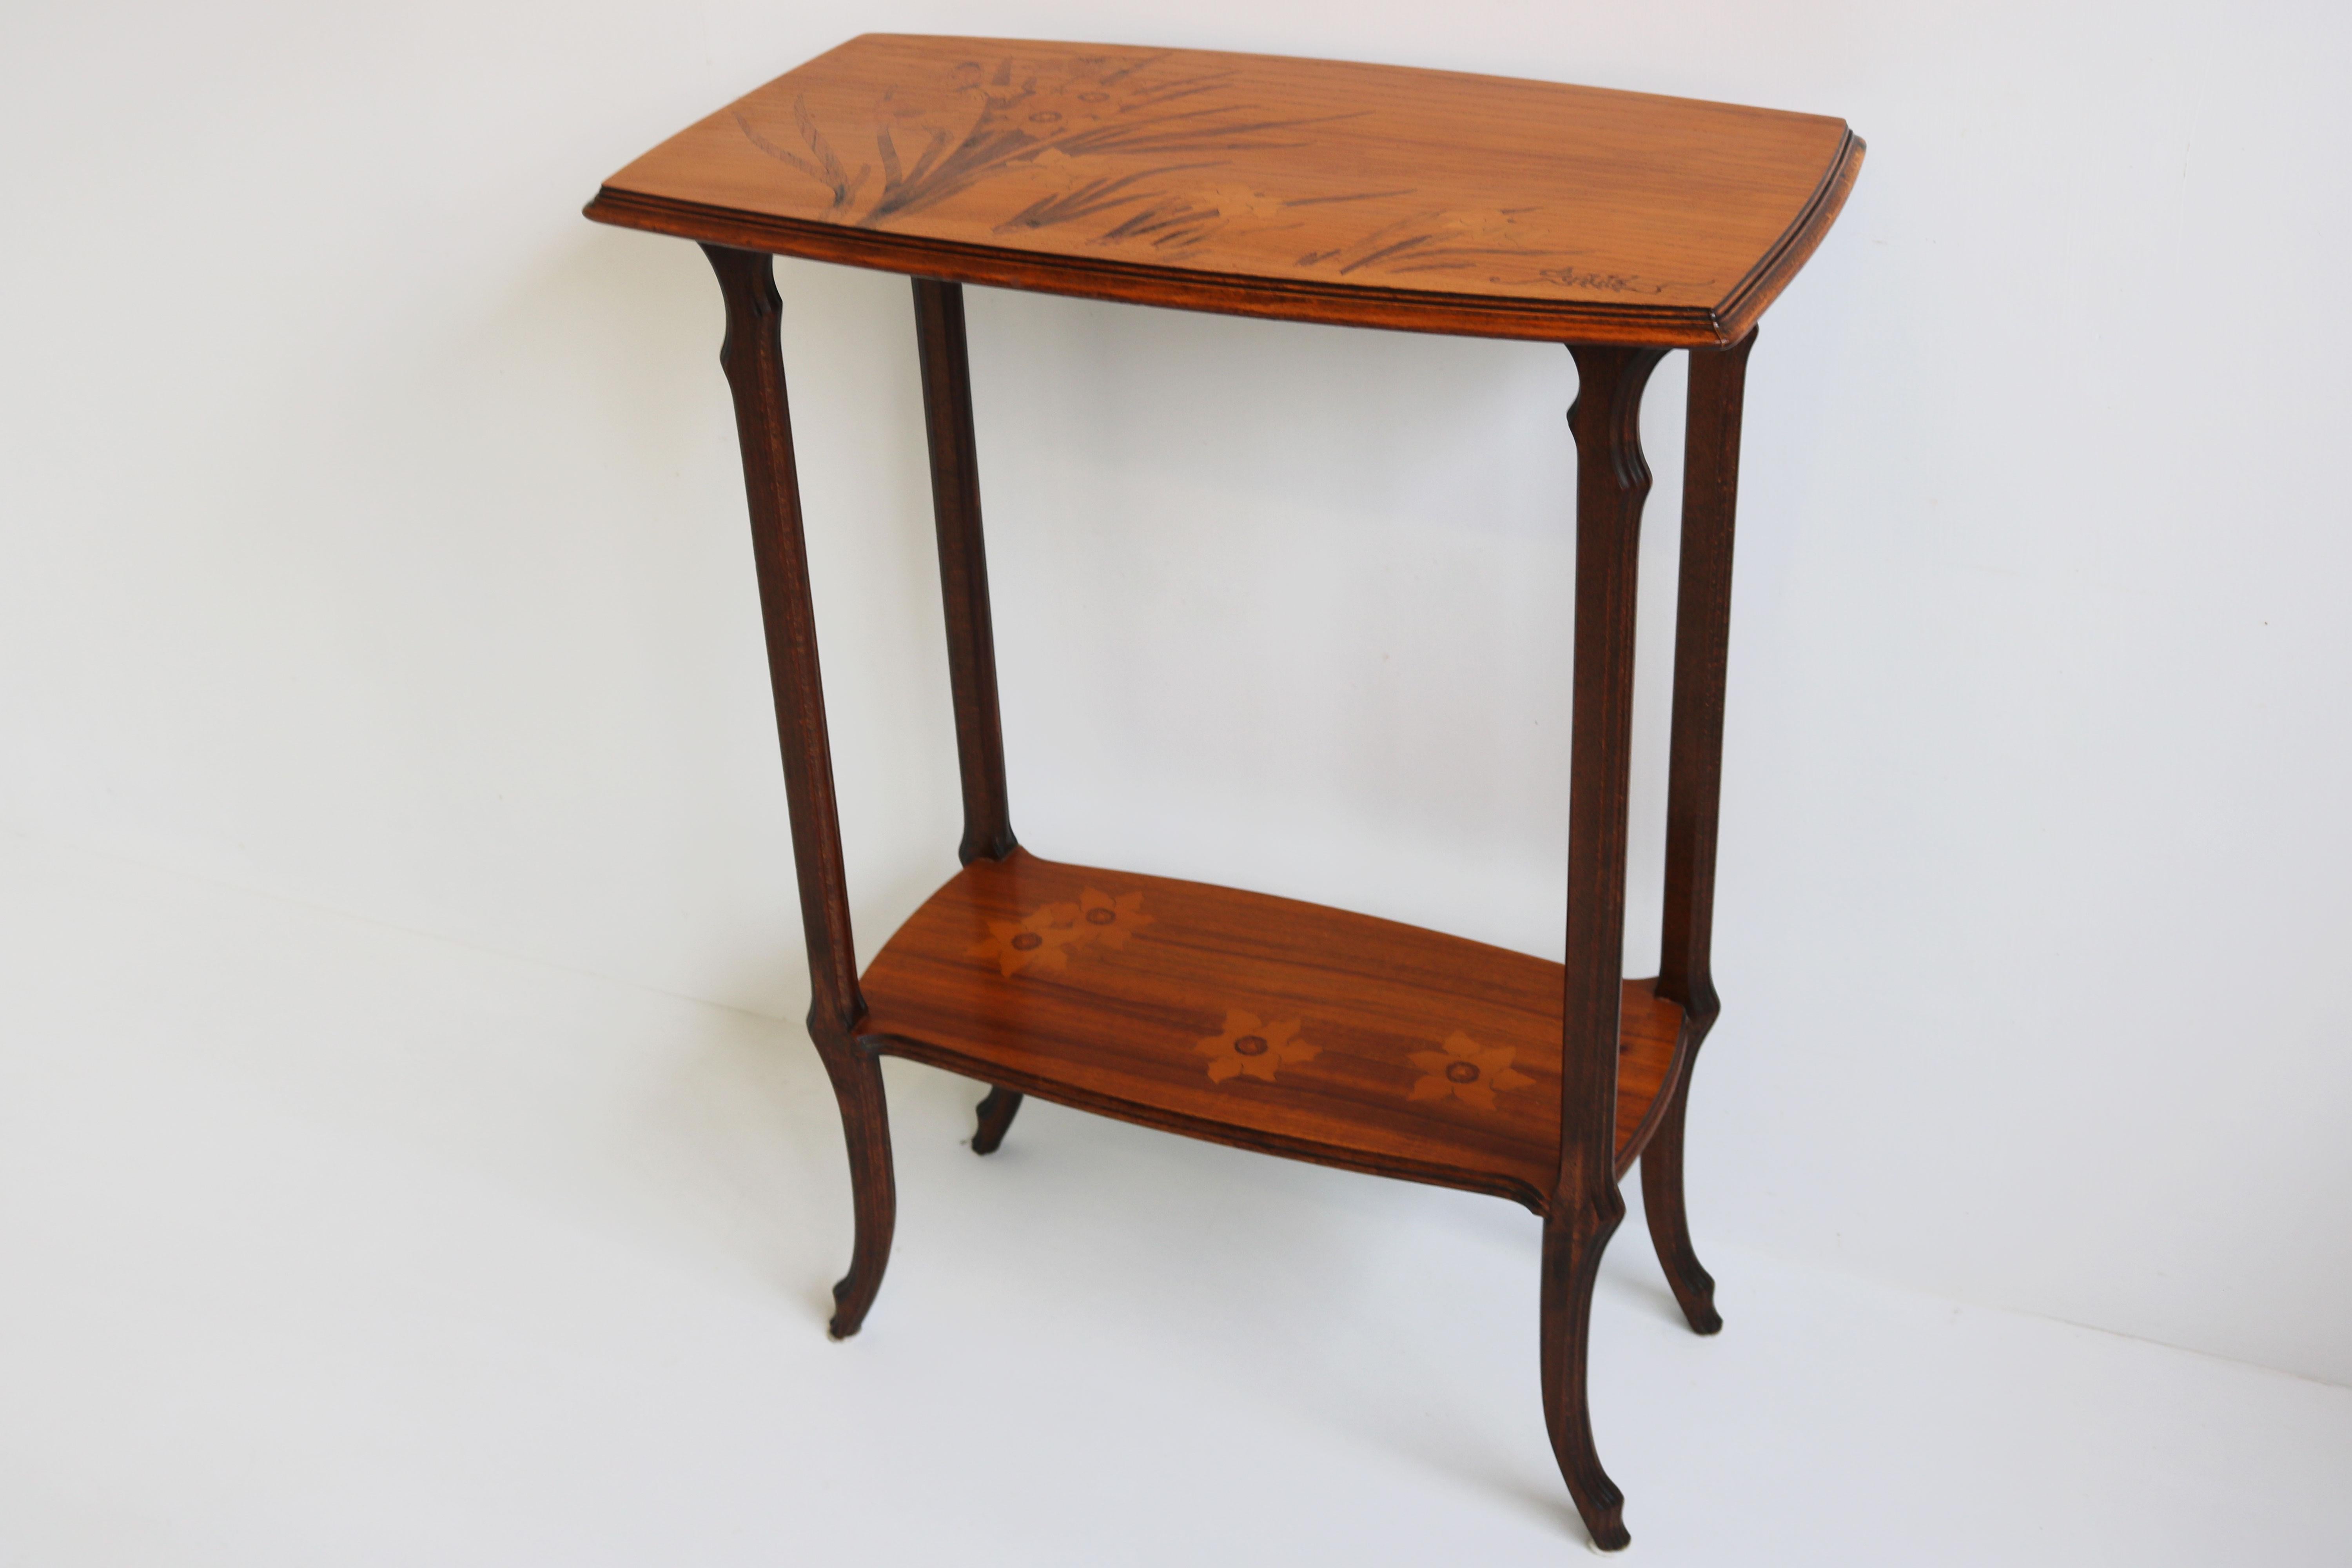 Original Antique French Art Nouveau Side Table by Emile Galle 1900 Inlaid Wood 3